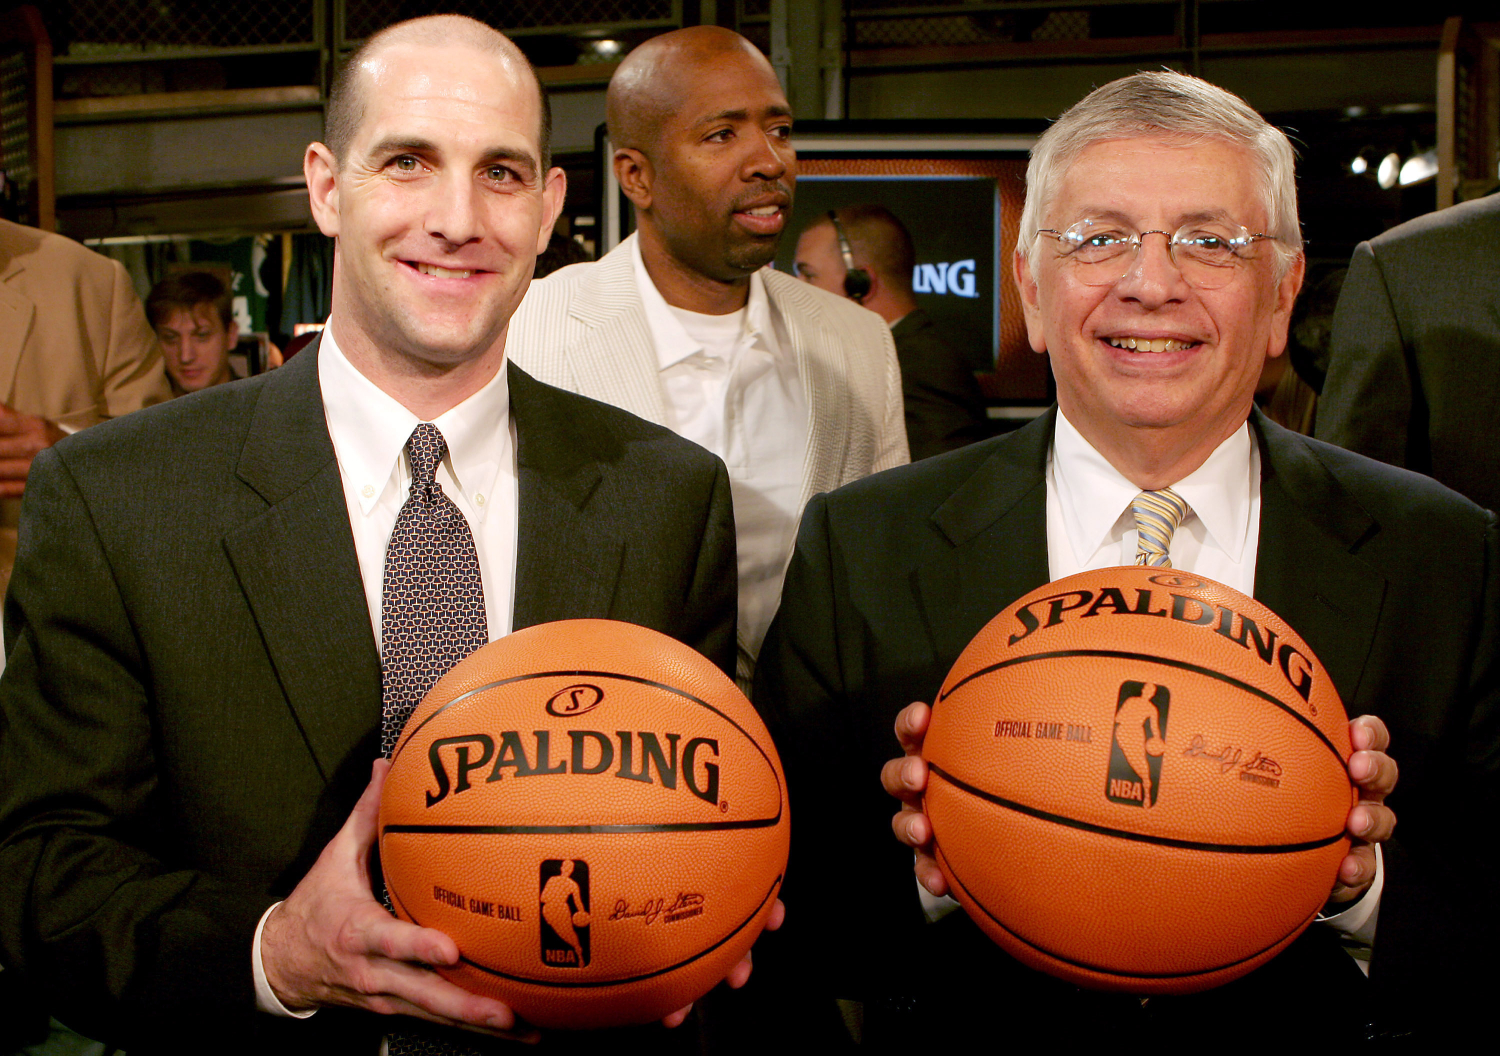 David Stern posing with the NBA ball that he introduced